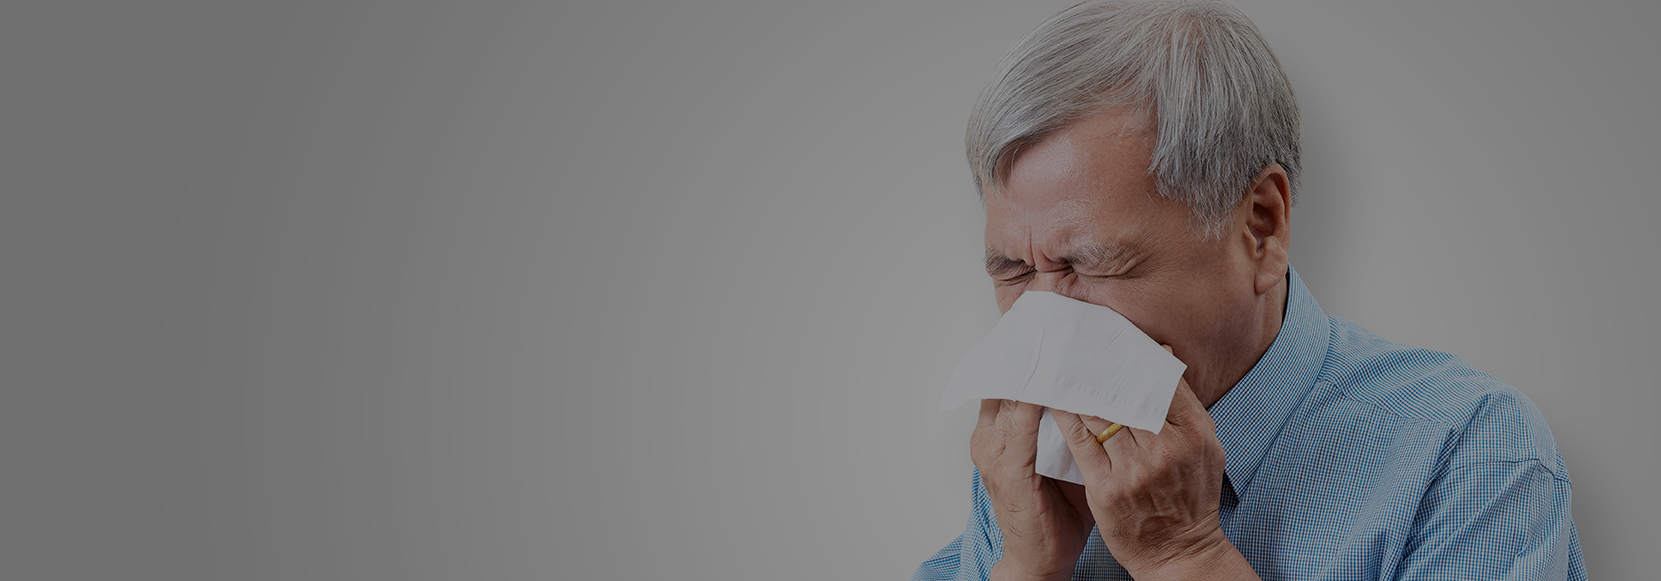 Comparison of allergens and symptoms in patients with allergic rhinitis between 1990s and 2010s